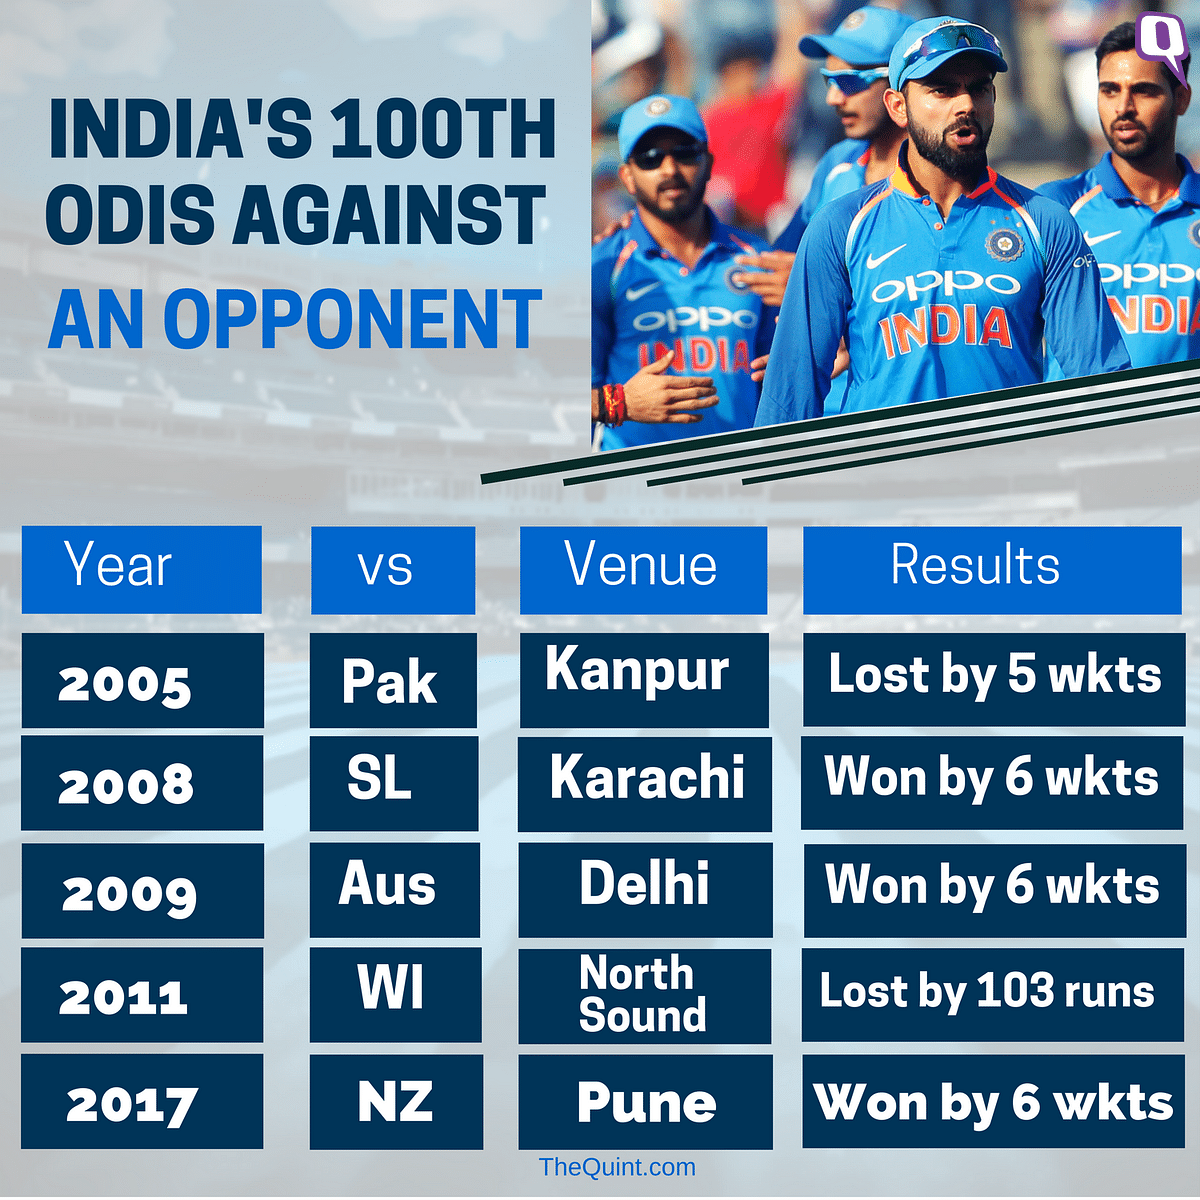 Take a look at the second ODI between India and New Zealand through some interesting numbers.